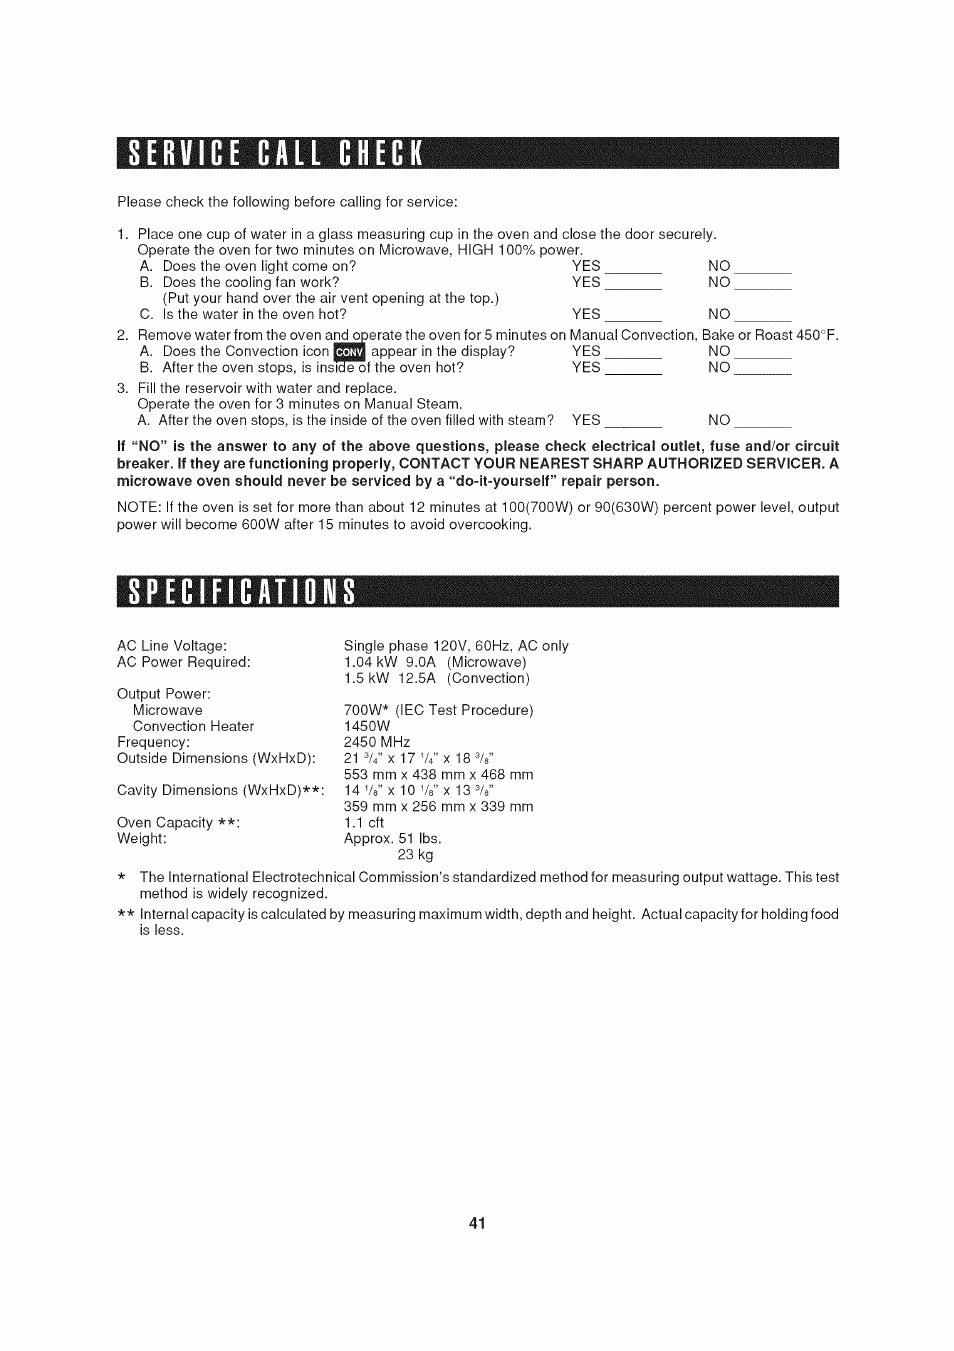 Service call check, Specifications | Sharp AX-1200 User Manual | Page 43 / 43